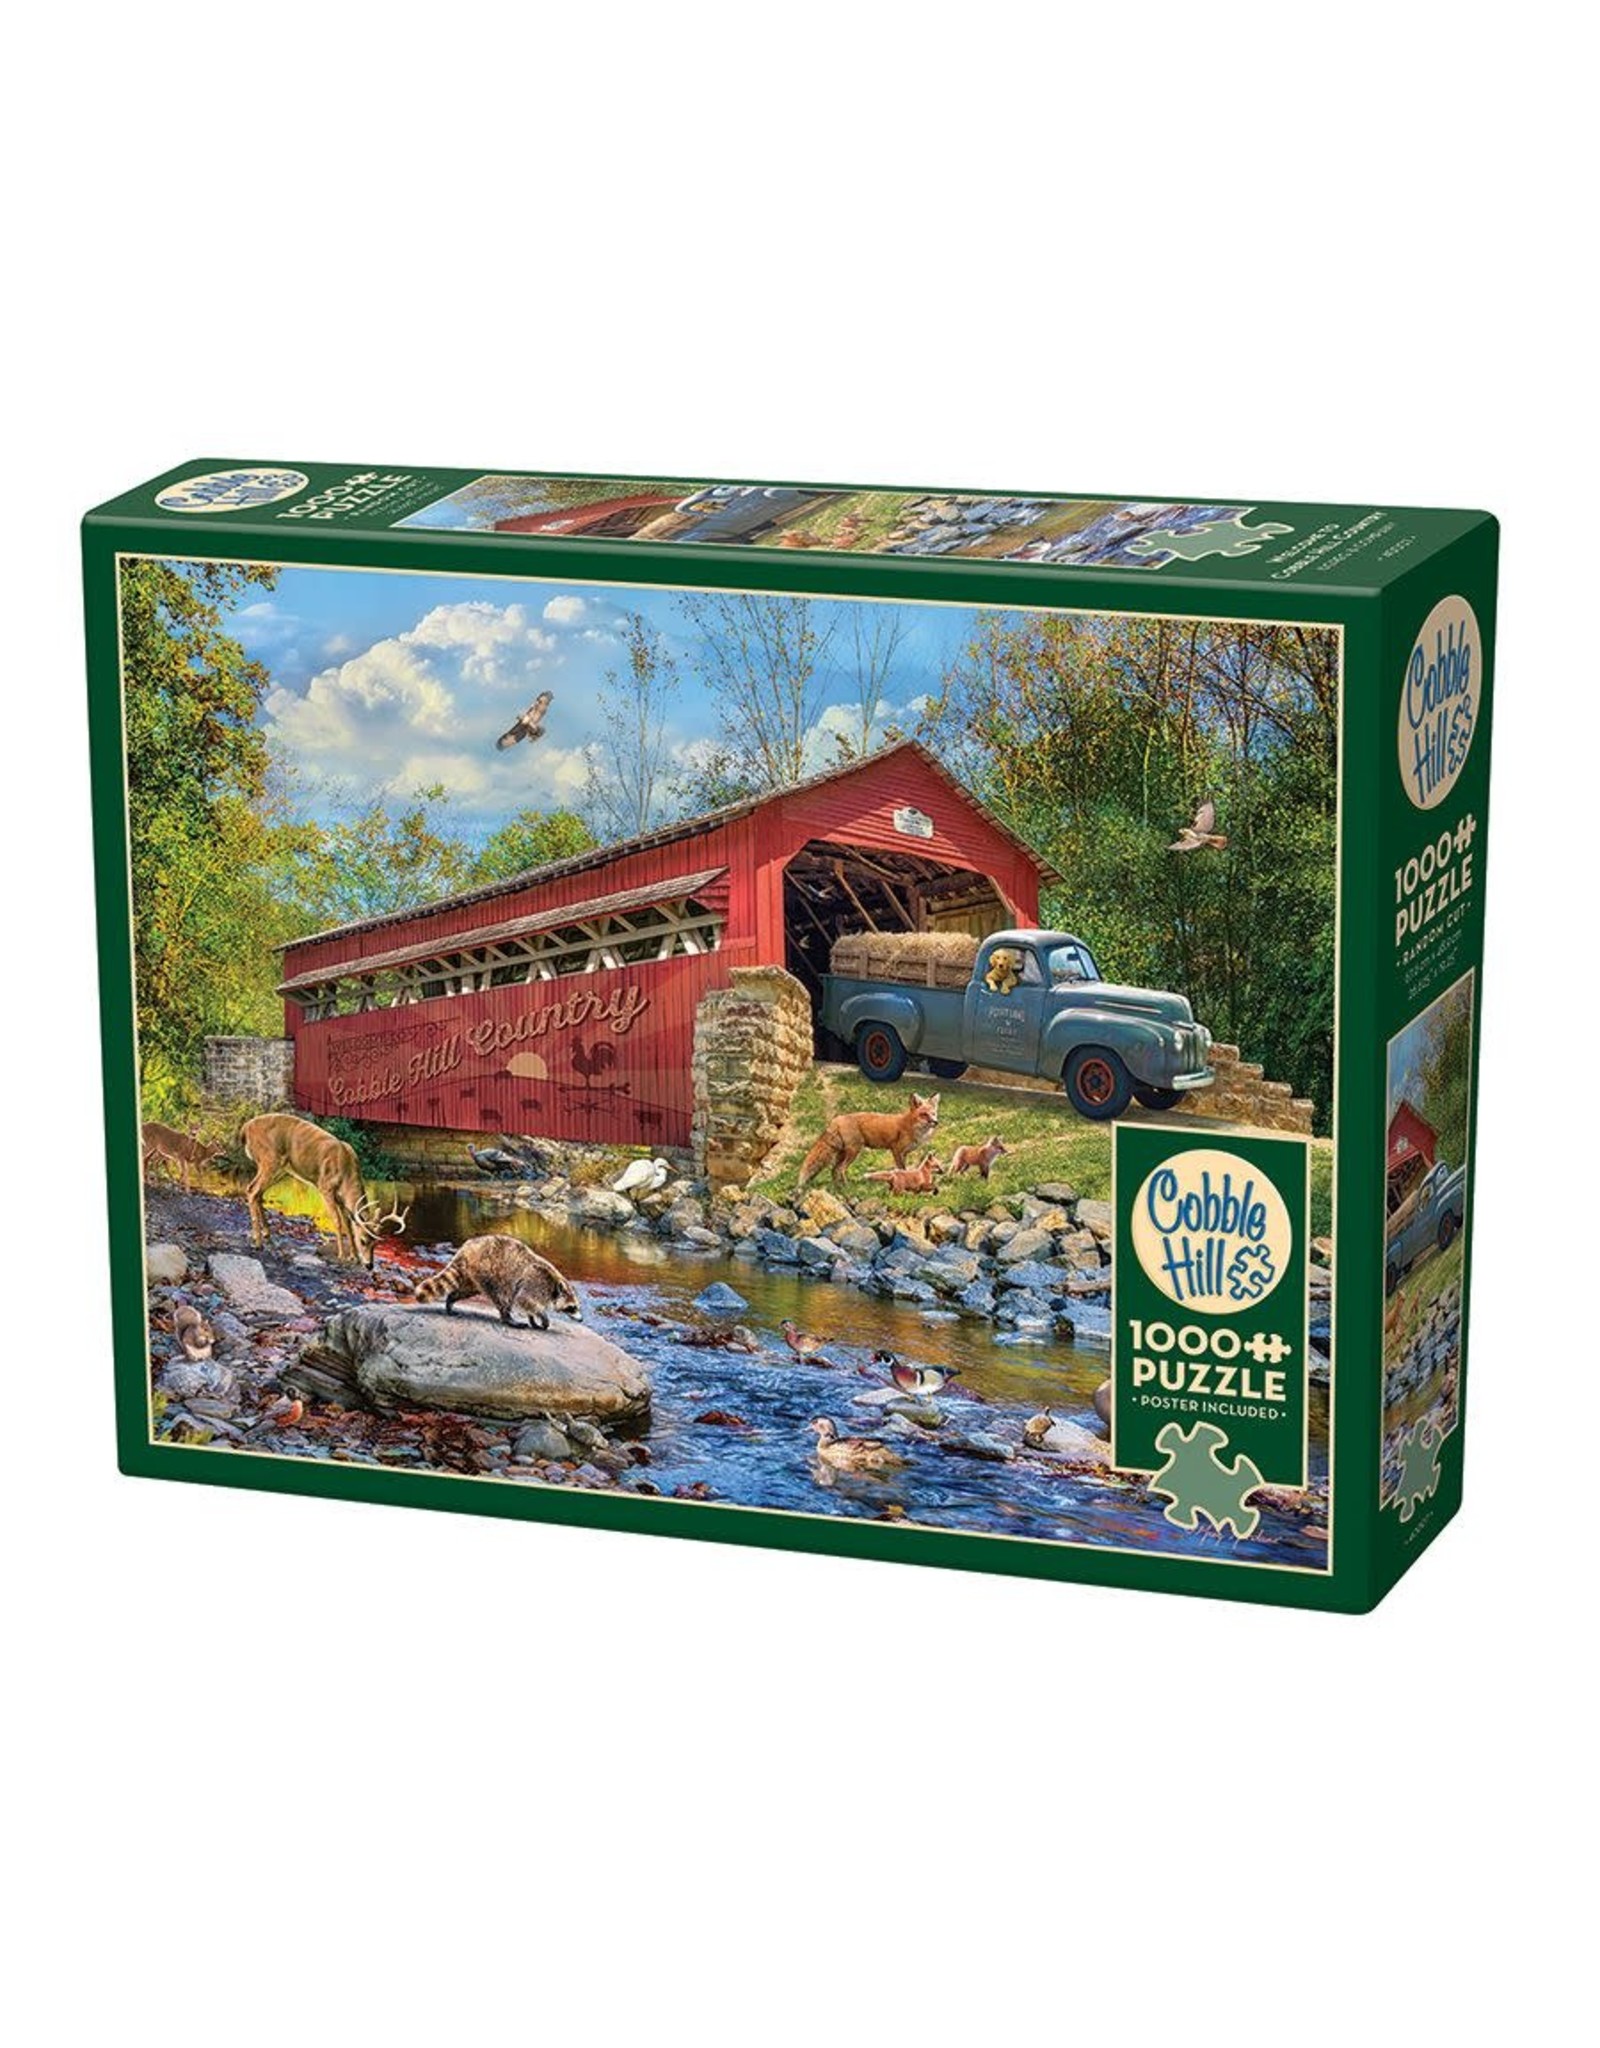 Cobble Hill Welcome to Cobble Hill Country 1000 pc